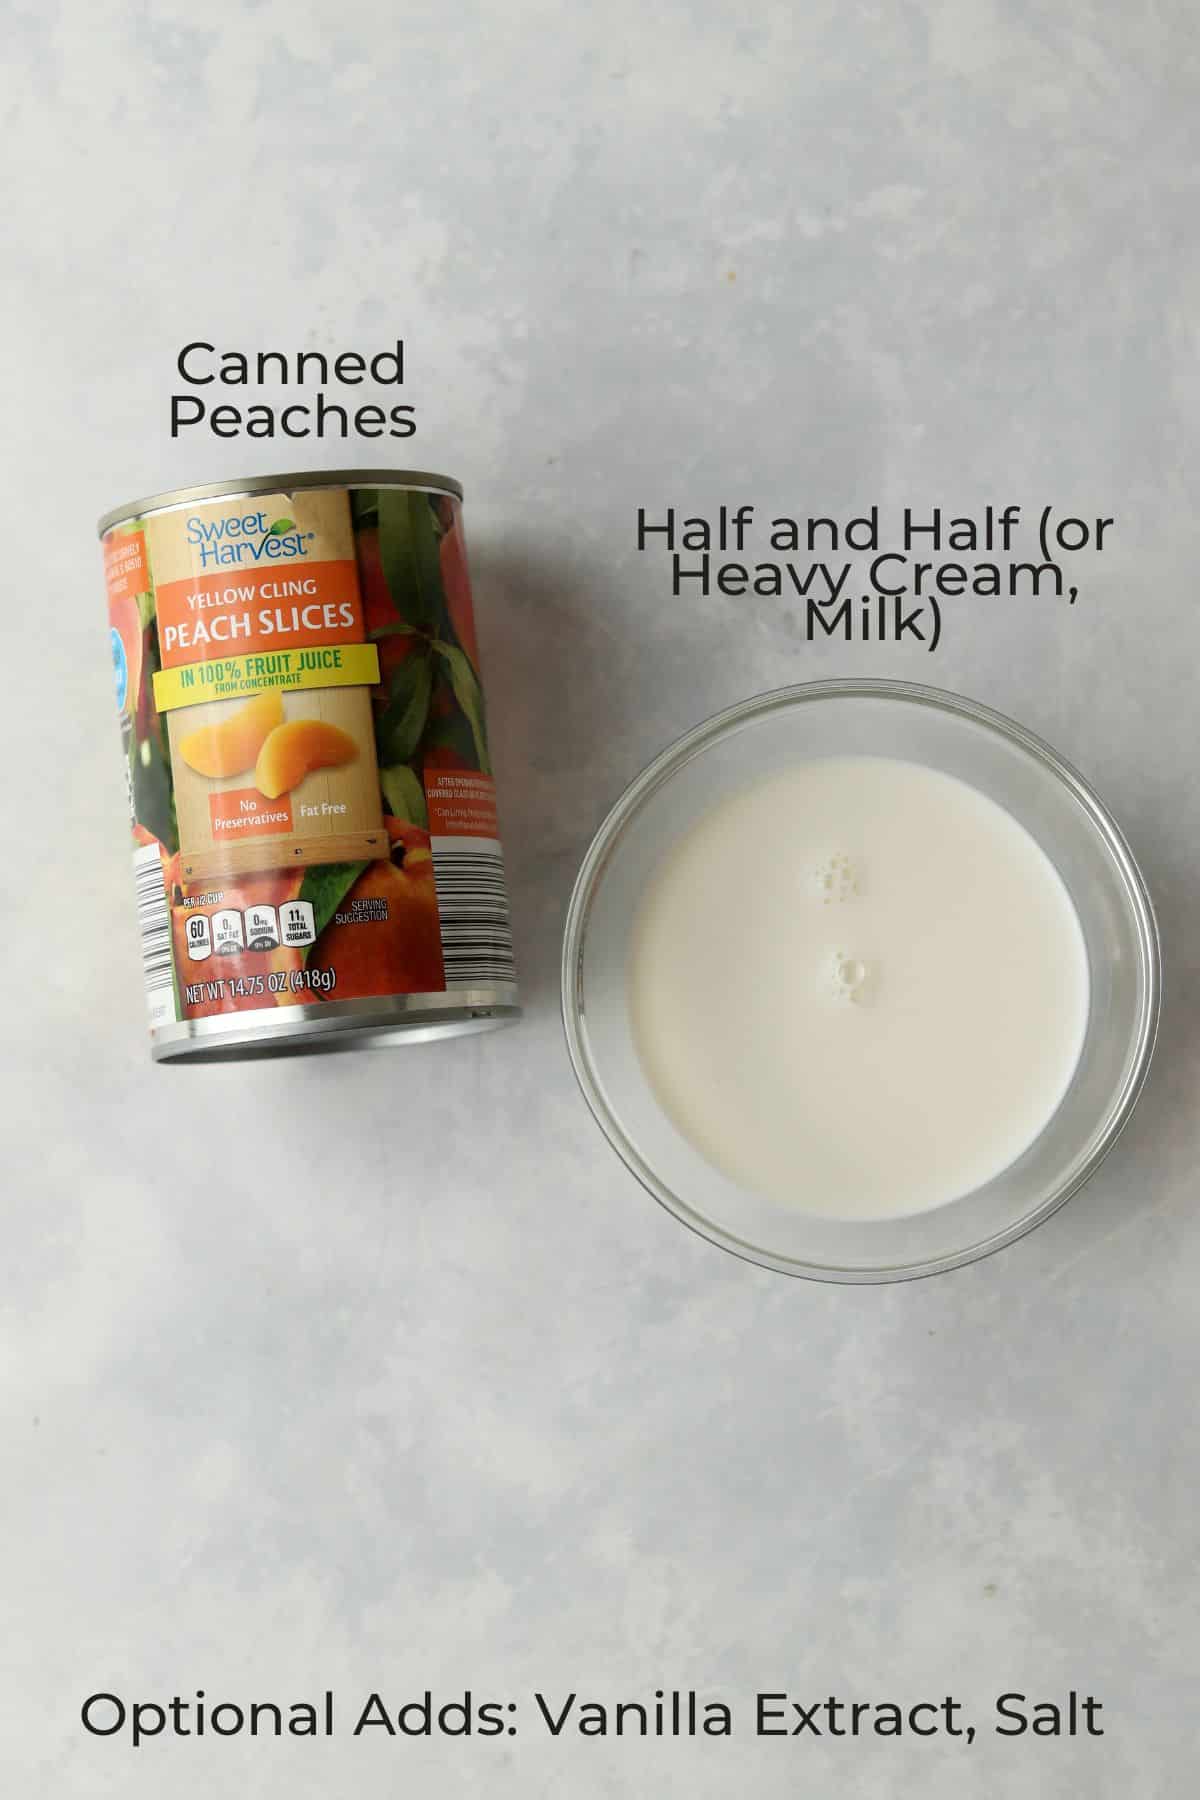 canned peaches and half and half in a small bowl arranged against a marble background.